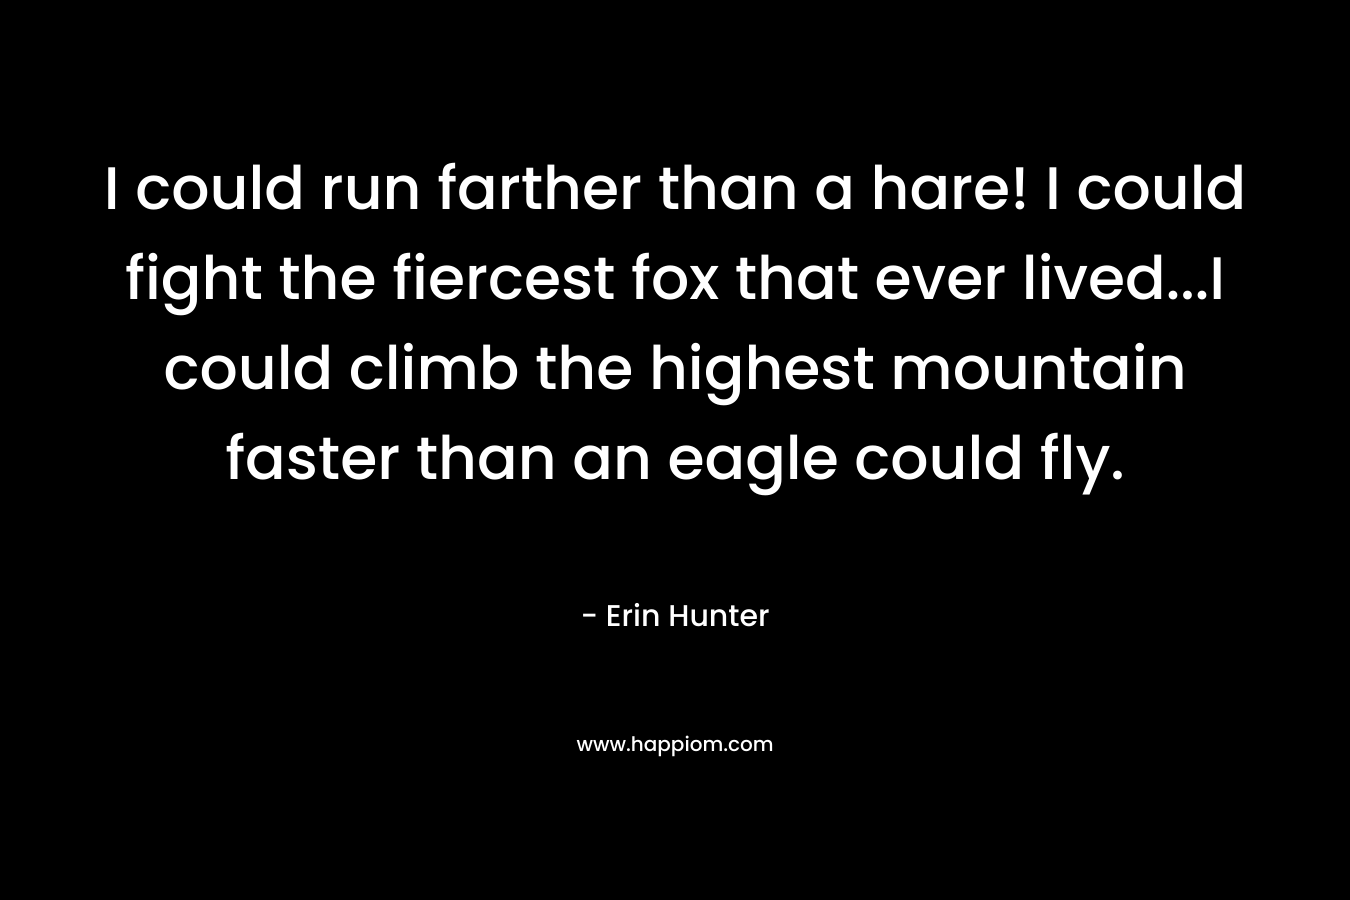 I could run farther than a hare! I could fight the fiercest fox that ever lived...I could climb the highest mountain faster than an eagle could fly.